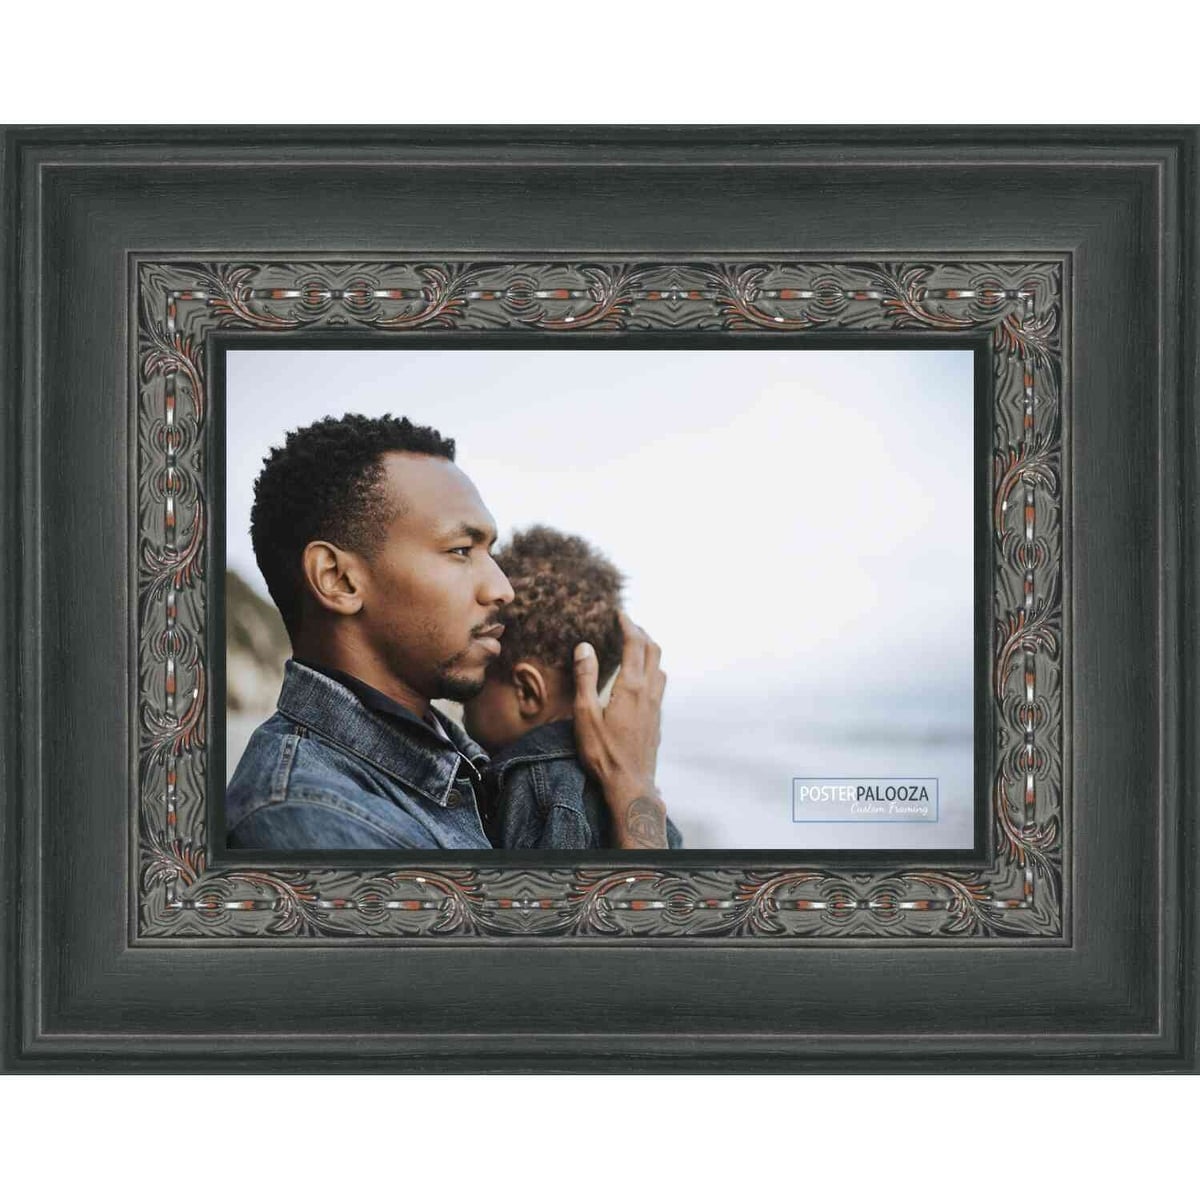 15x23 Distressed/Aged Black Complete Wood Picture Frame with UV Acrylic, Foam Board Backing, & Hardware